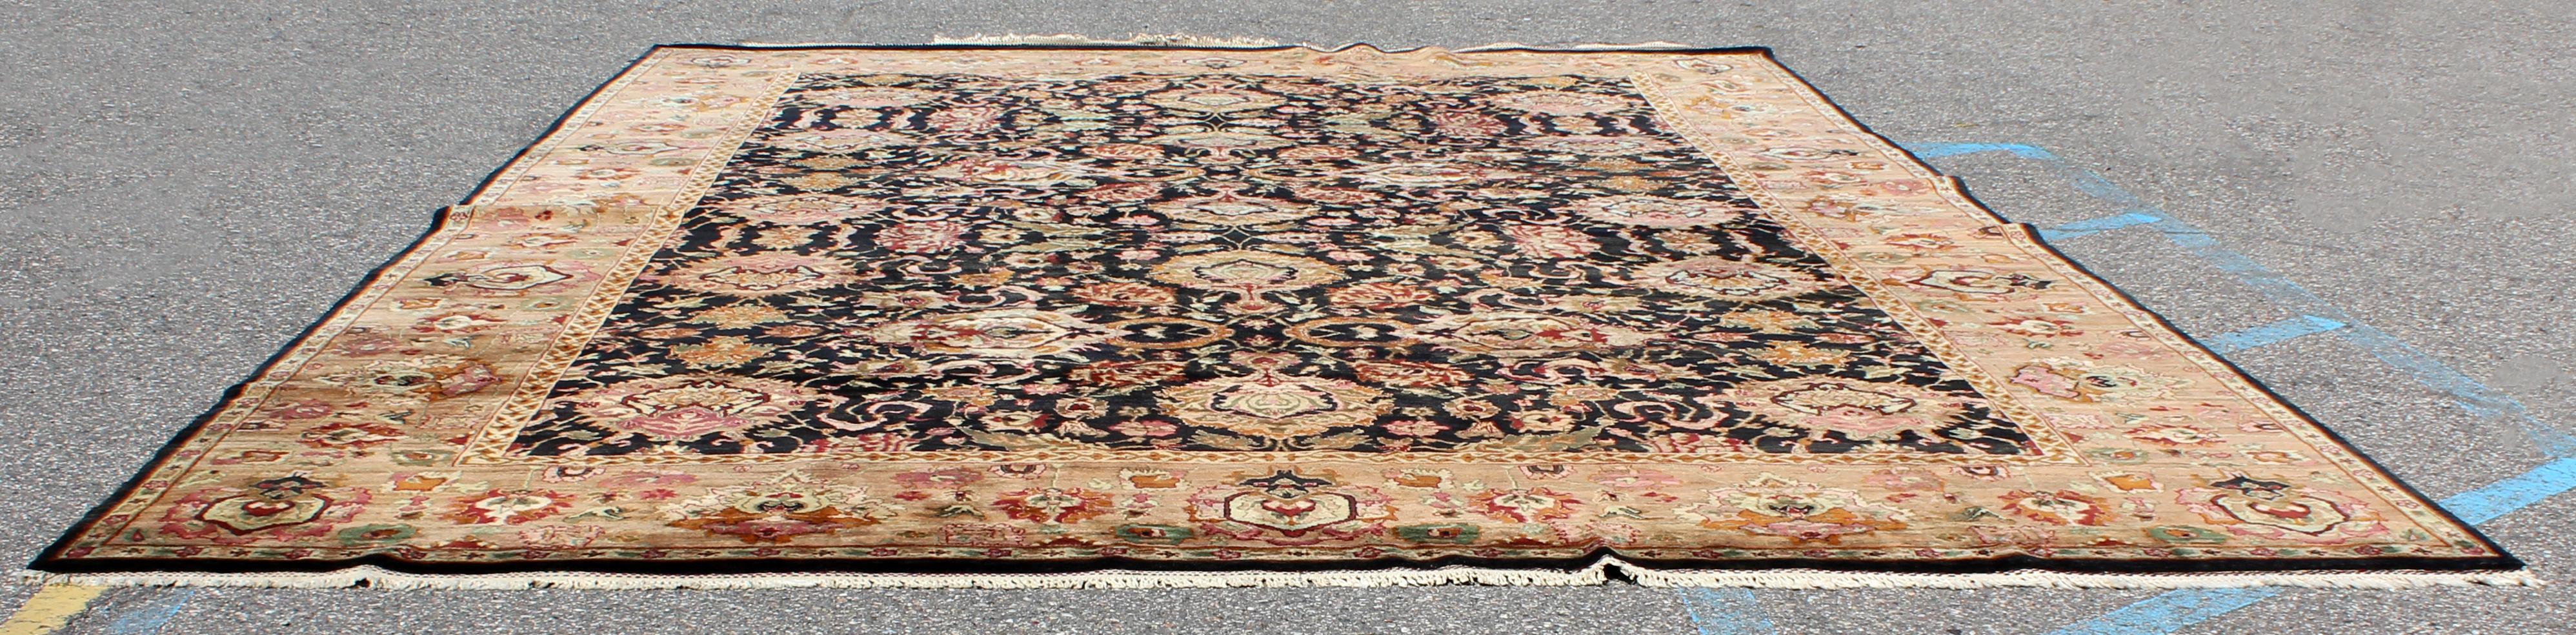 For your consideration is a monumentally floral Aubusson style wool area rug or carpet. In very good vintage condition. The dimensions are 160